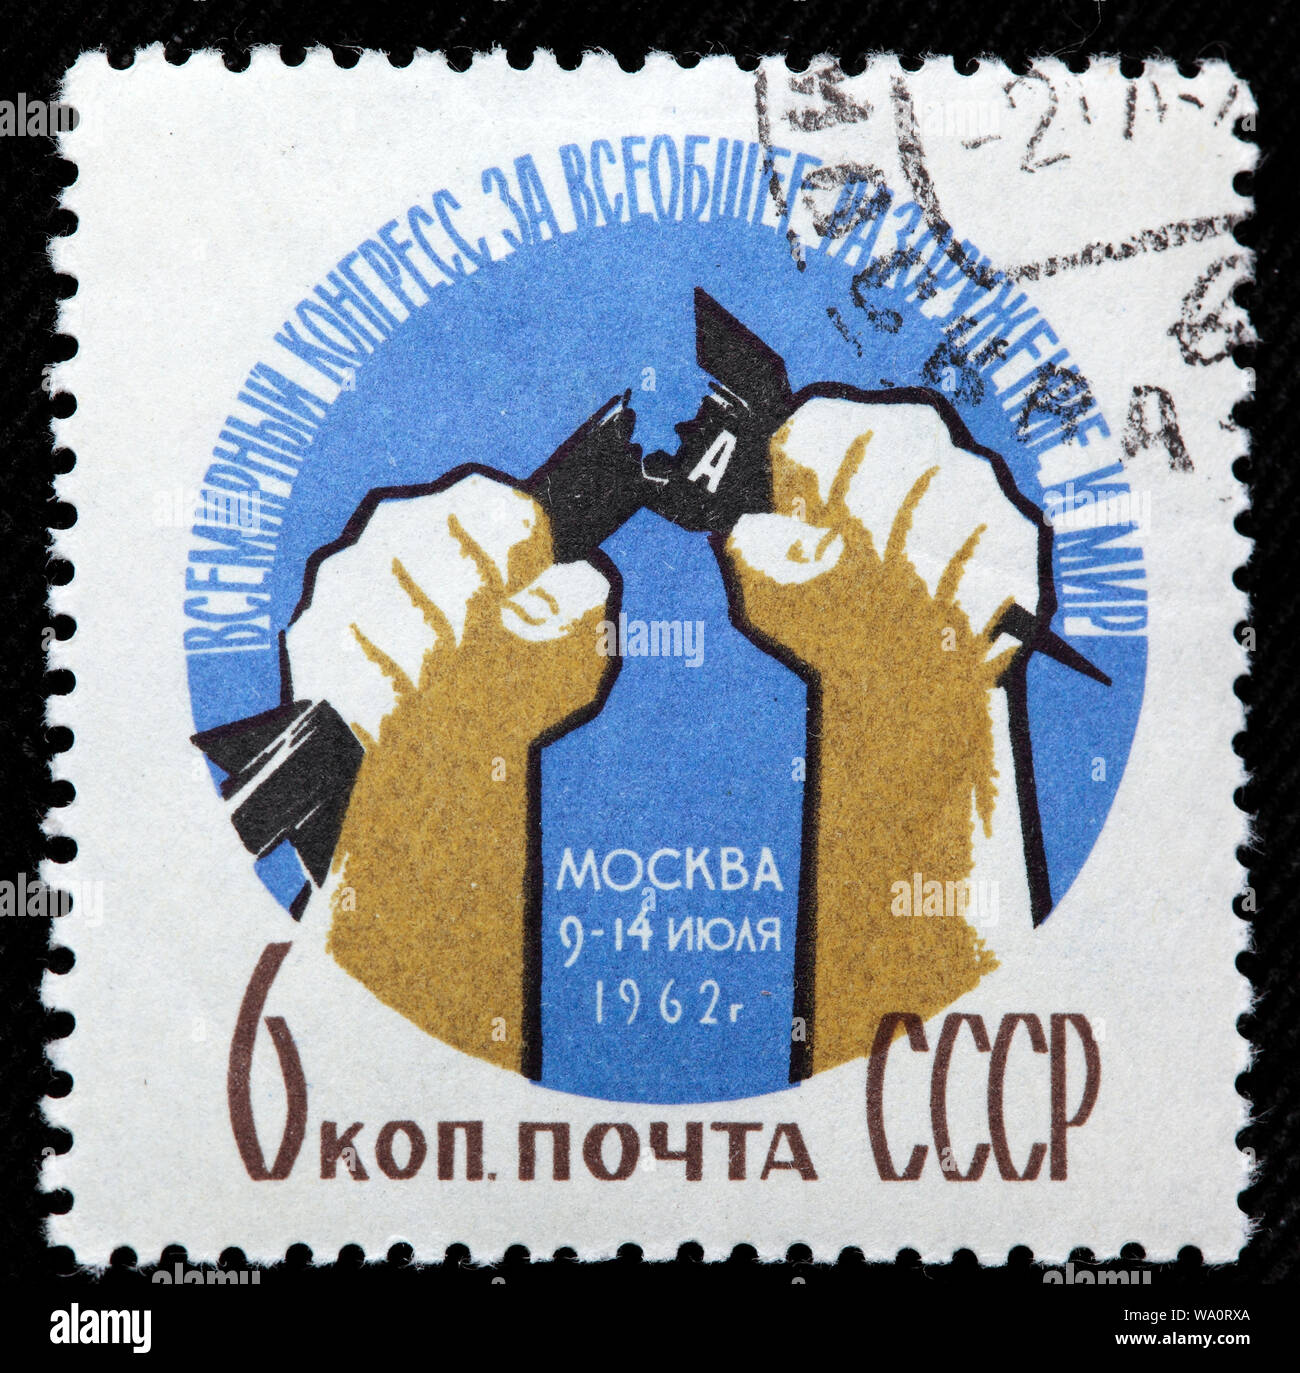 World Peace Congress, Moscow, postage stamp, Russia, USSR, 1962 Stock Photo